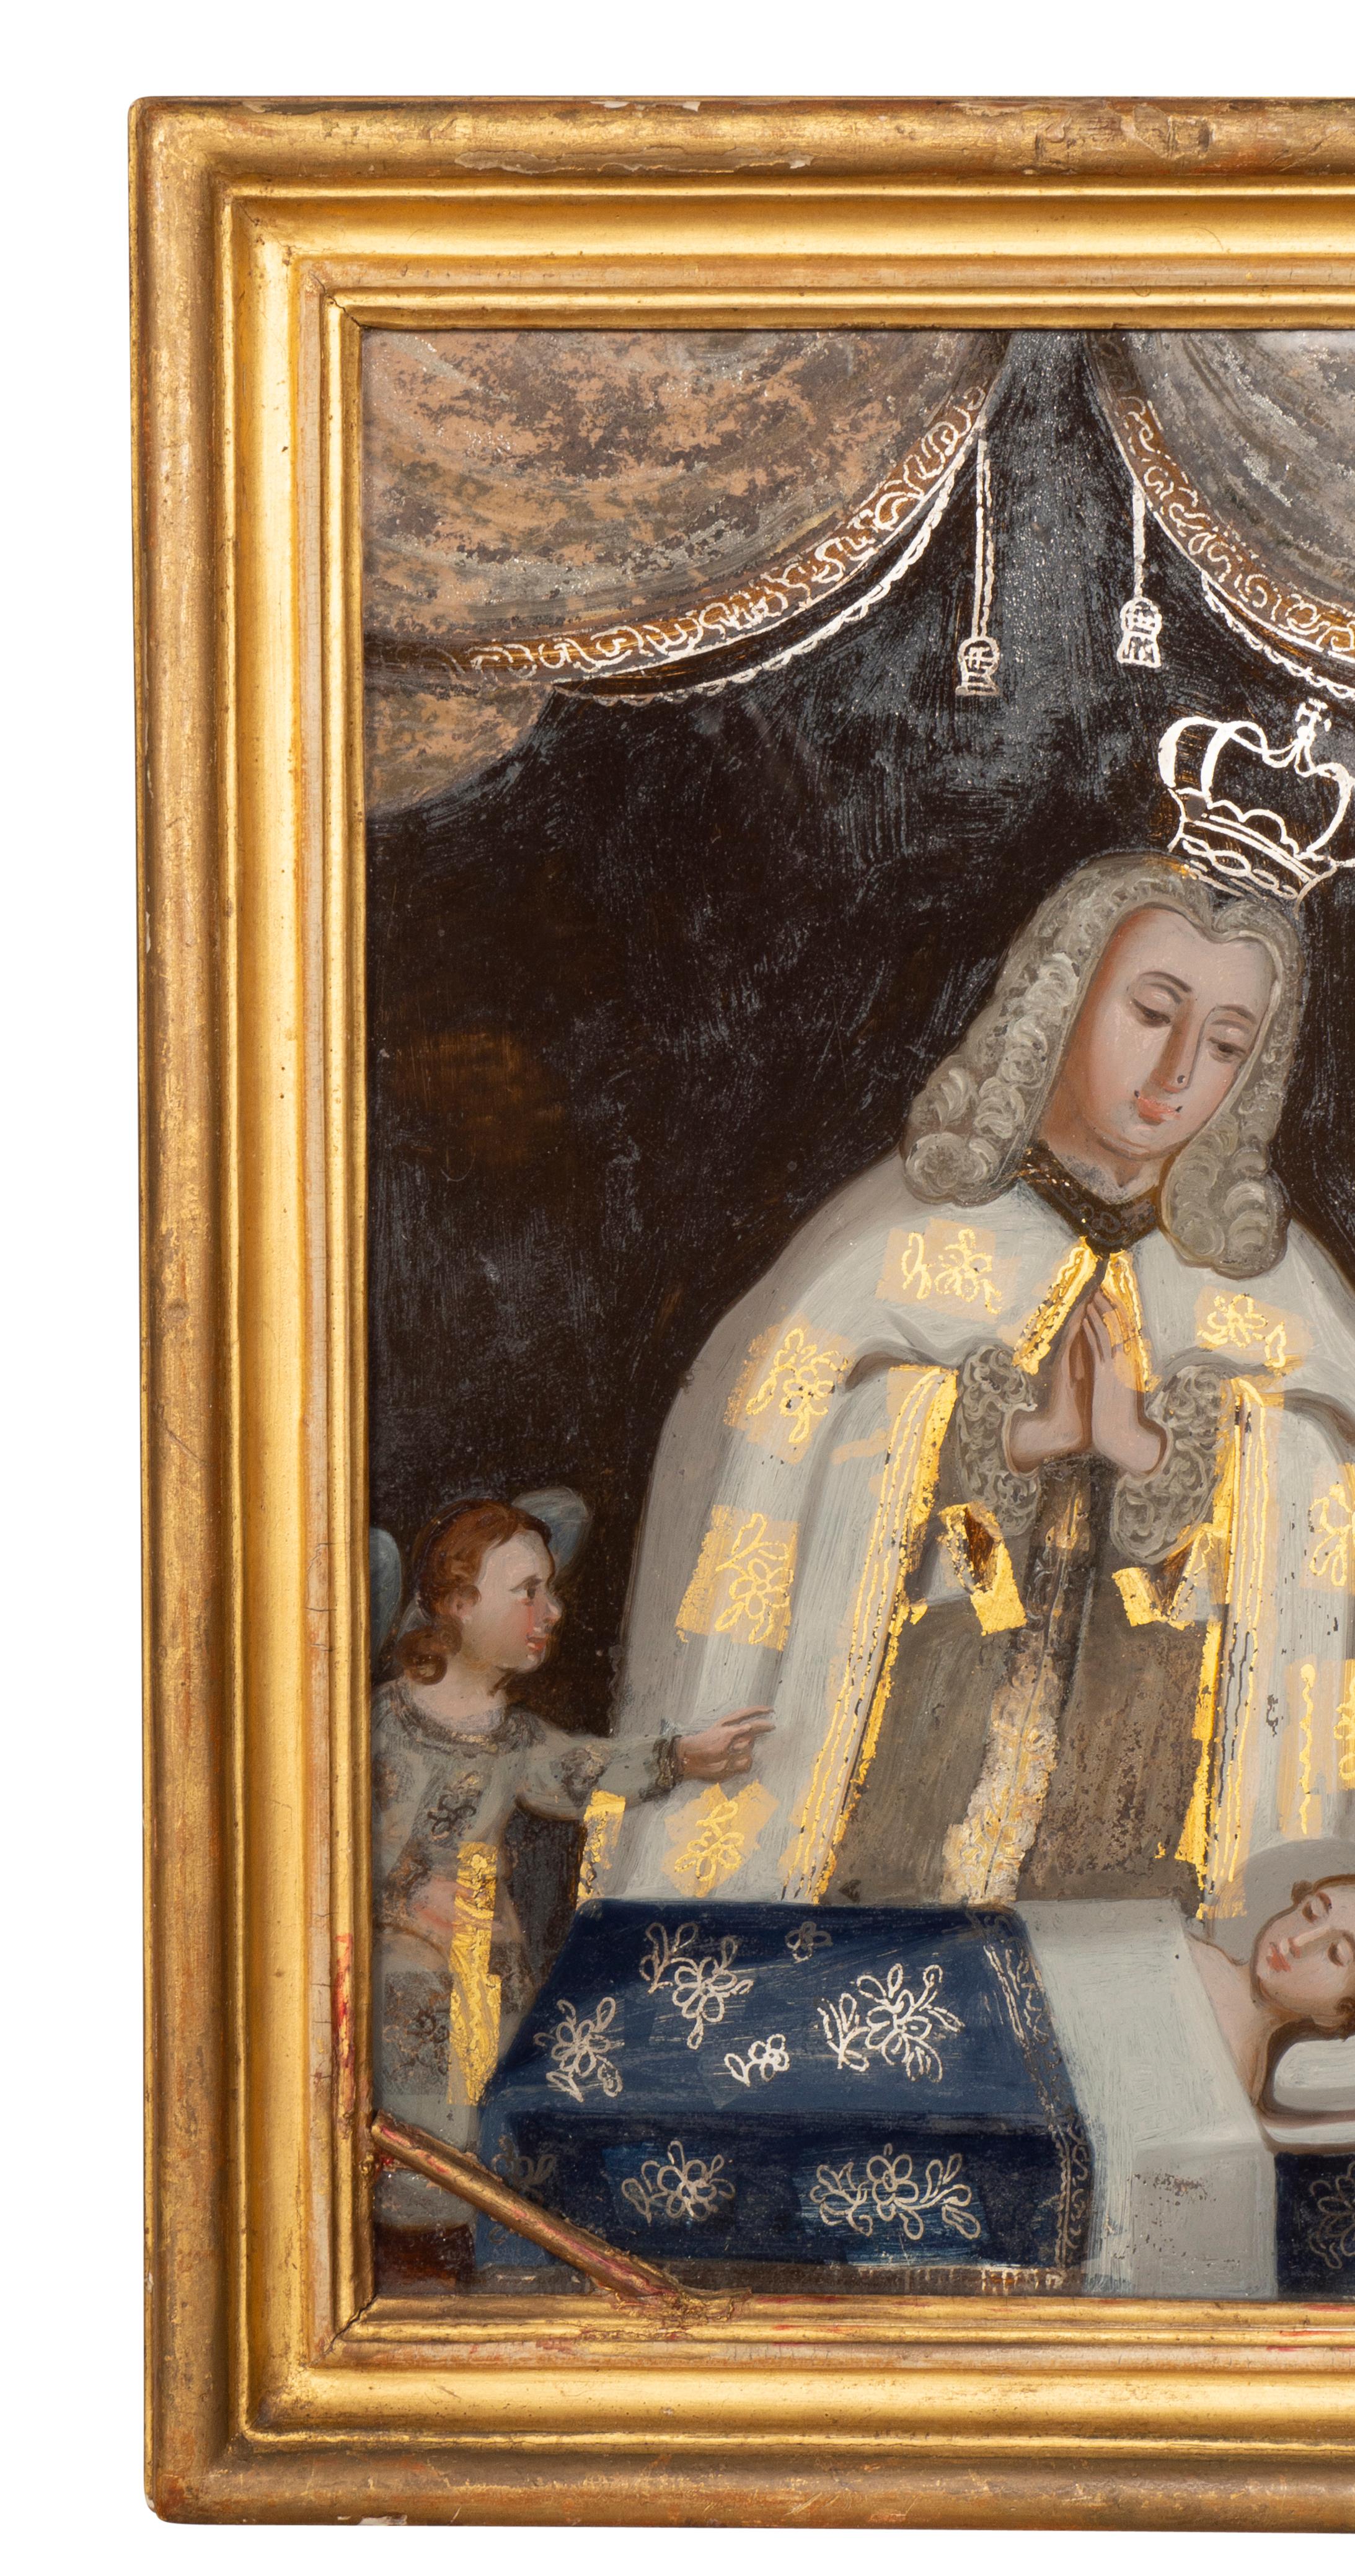 Hand-Painted European Reverse Painting on Glass of a King Praying for a Child For Sale